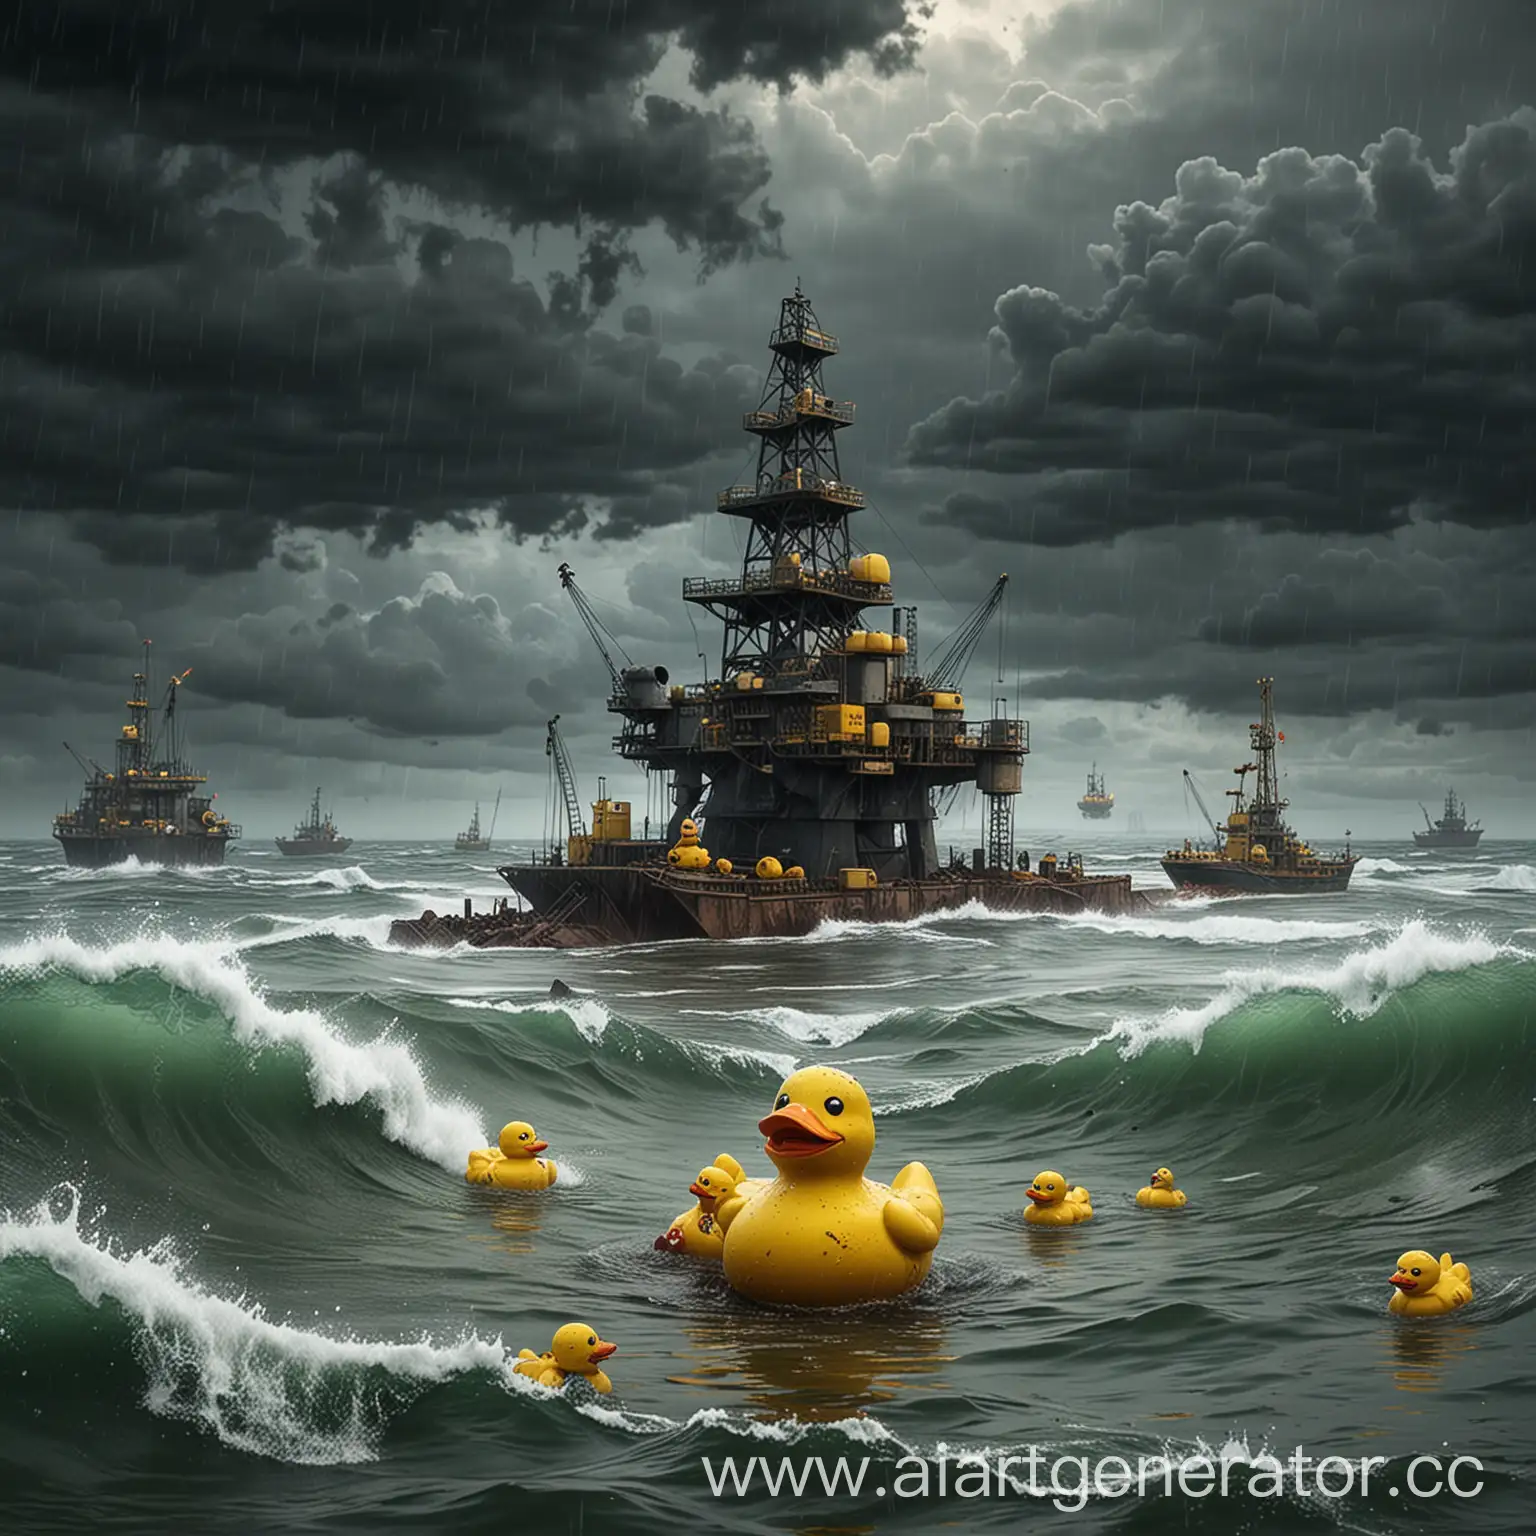 PostApocalyptic-Ocean-Storm-with-Yellow-Rubber-Ducks-and-Oil-Drilling-Station